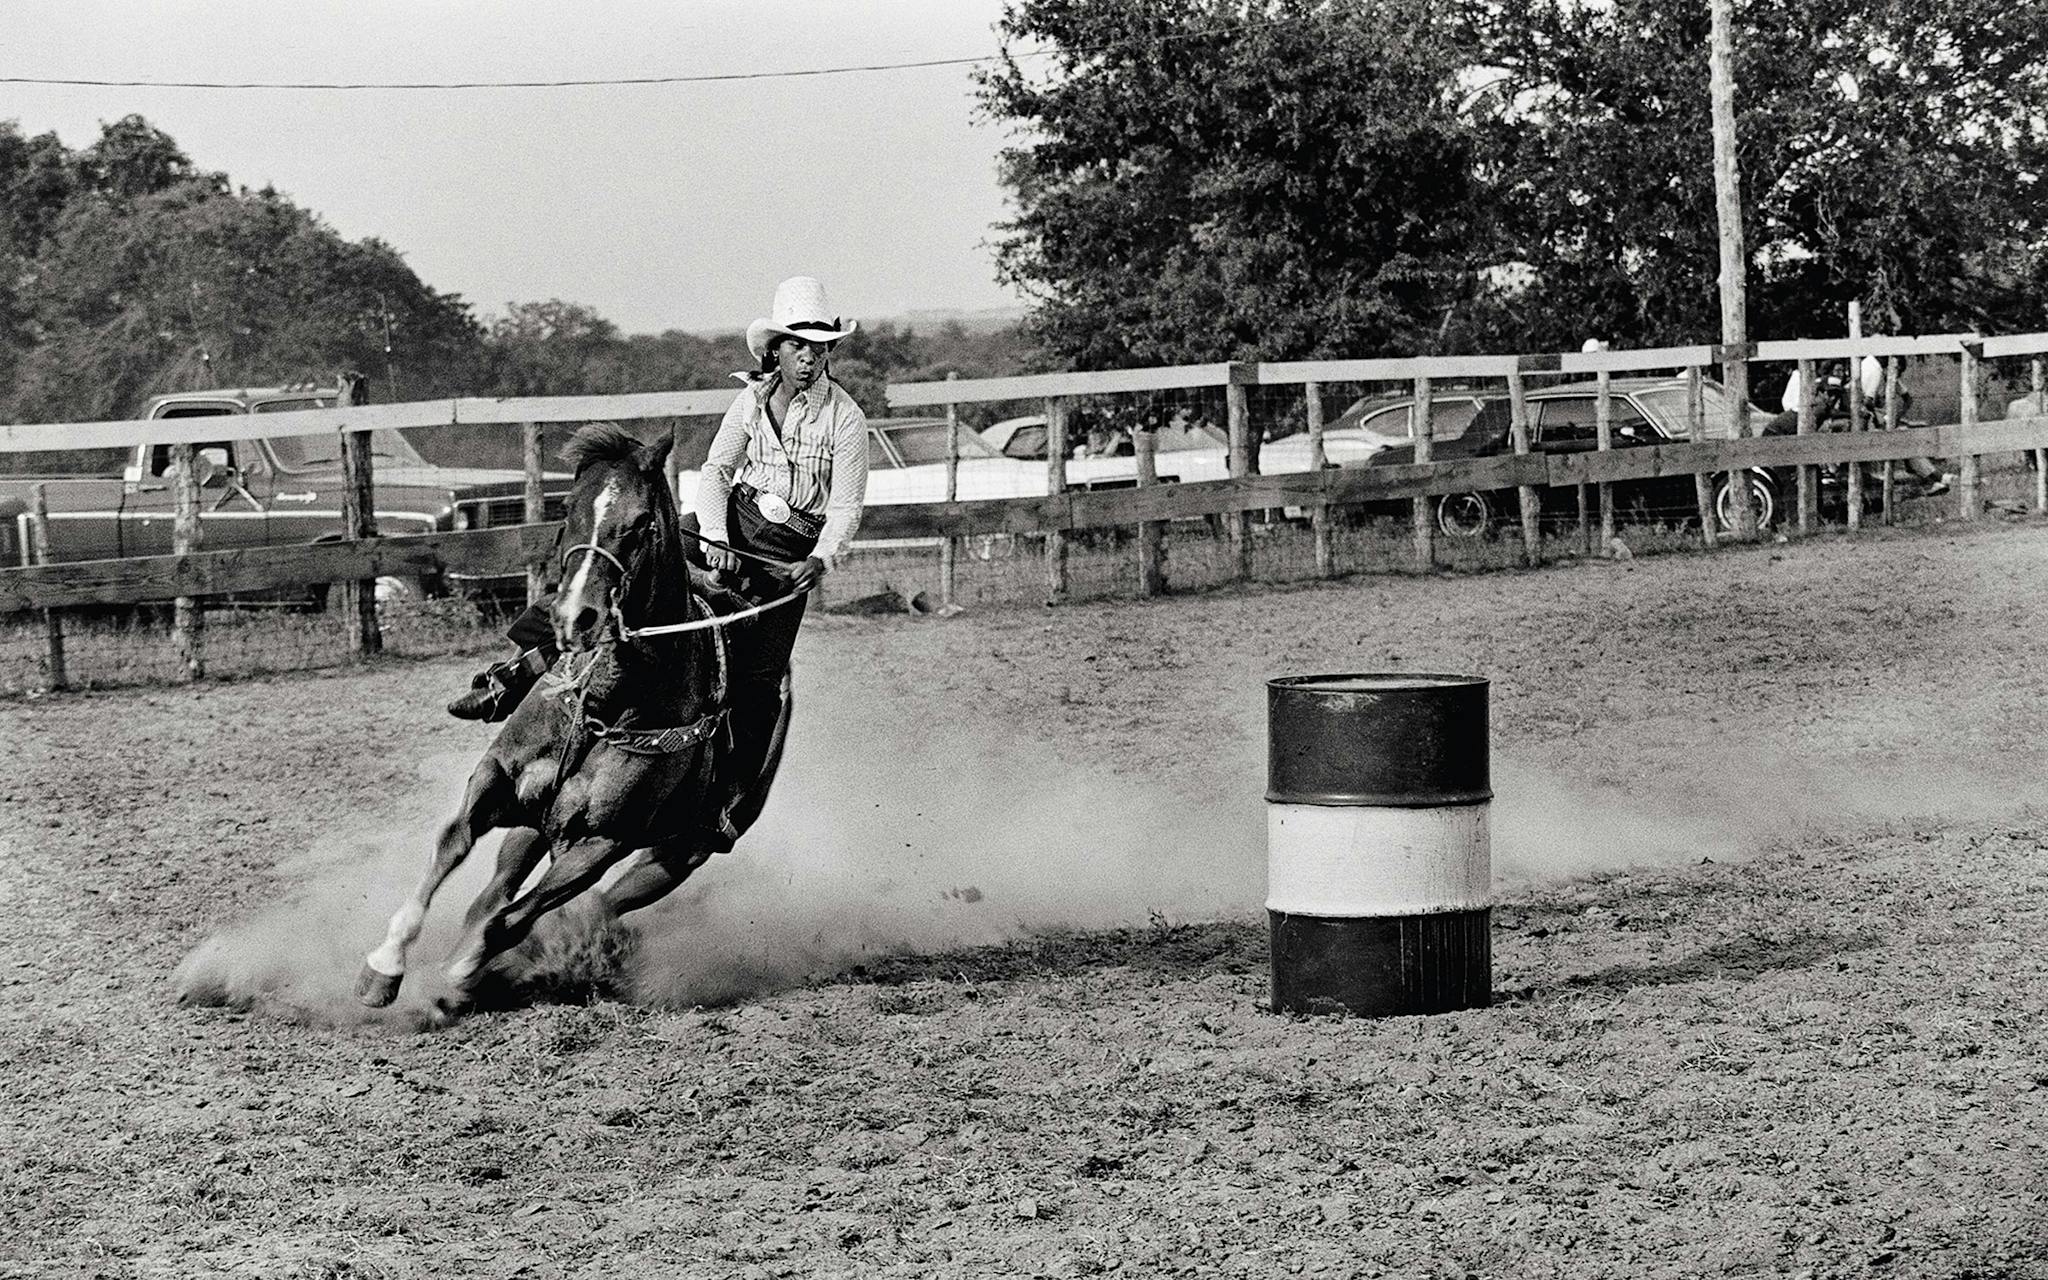 Barrel racer Earnestine Rogers rounding the third barrel and preparing to take it home in the summer of 1979, near El Campo.